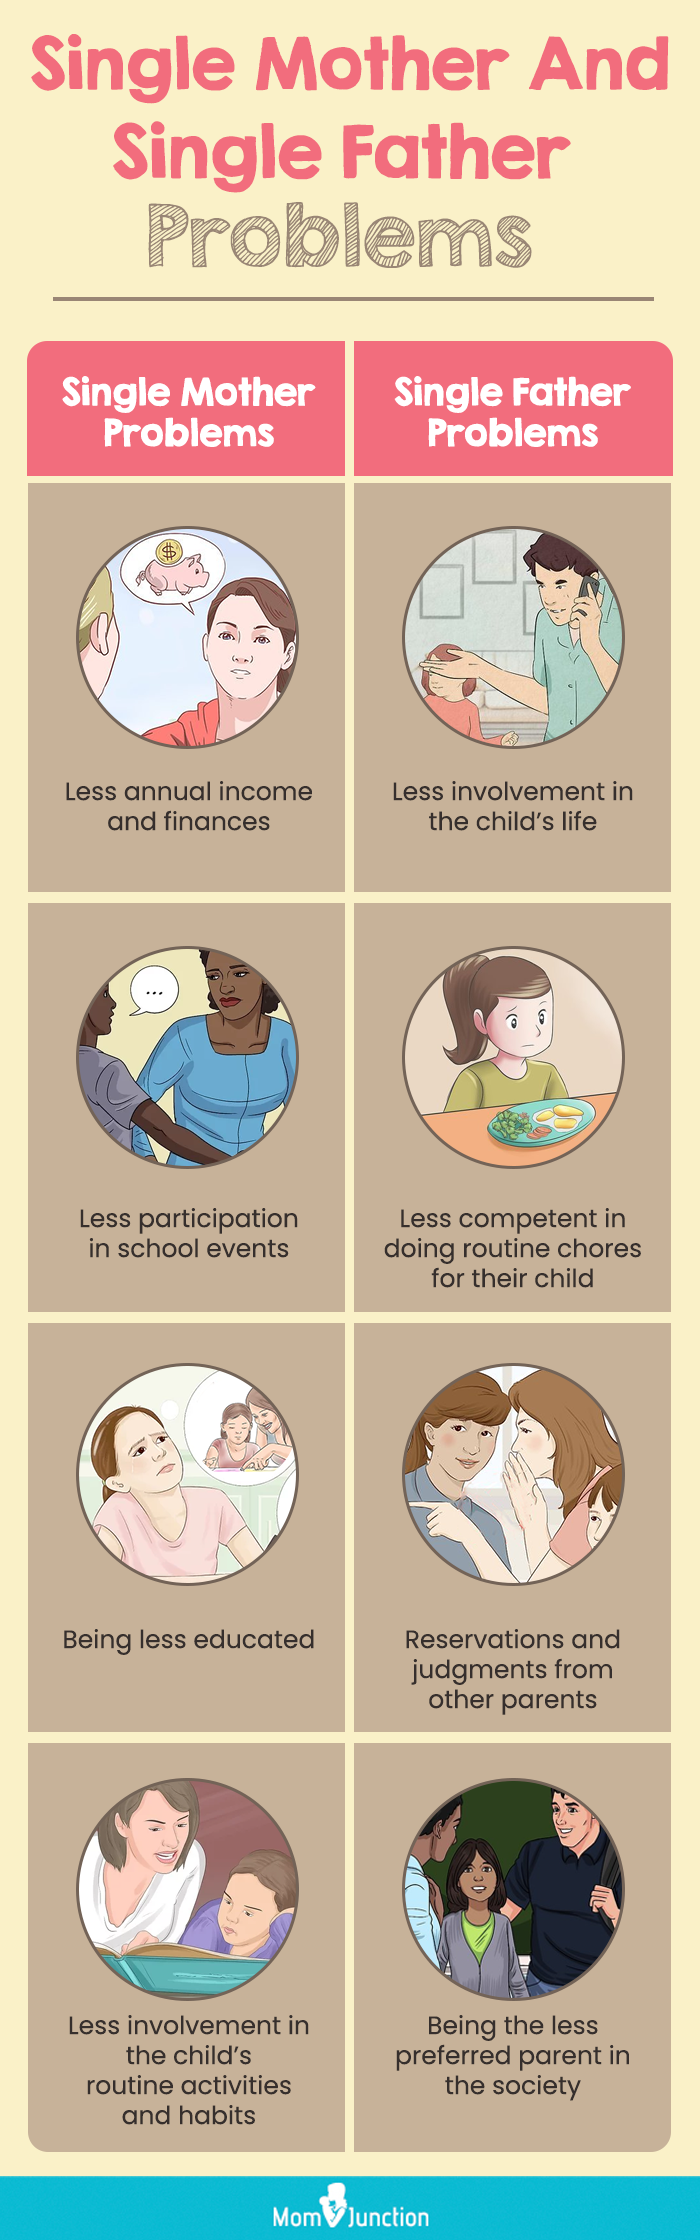 single mother single father [infographic]